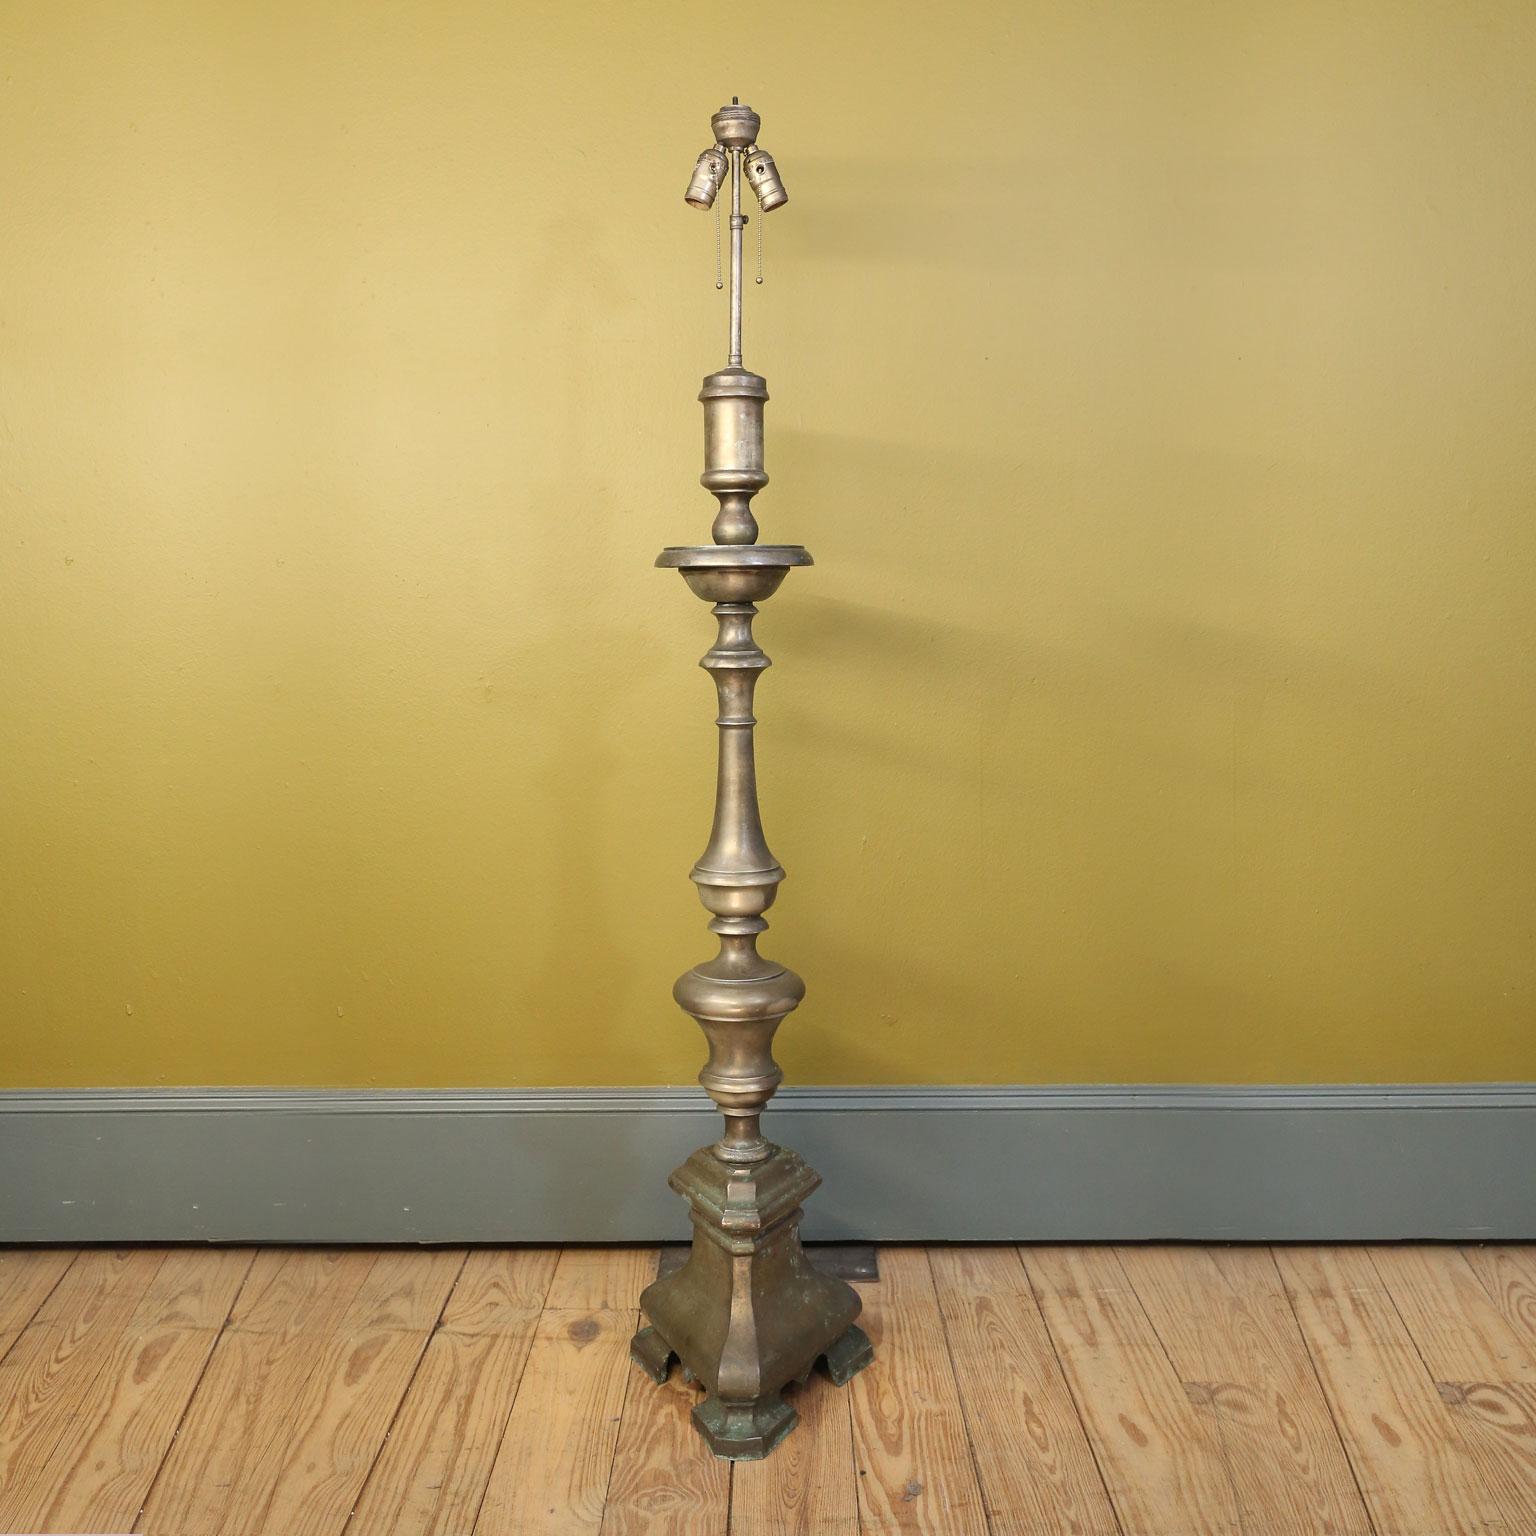 Baroque style Belgian floor lamp, (circa 1900-1920) in brass. Beautiful rich patina. Newly wired for use within the USA using all UL approved parts. Accommodates two medium-size (Edison) bulbs. Sold without shade. The lamps is heavy and of beautiful